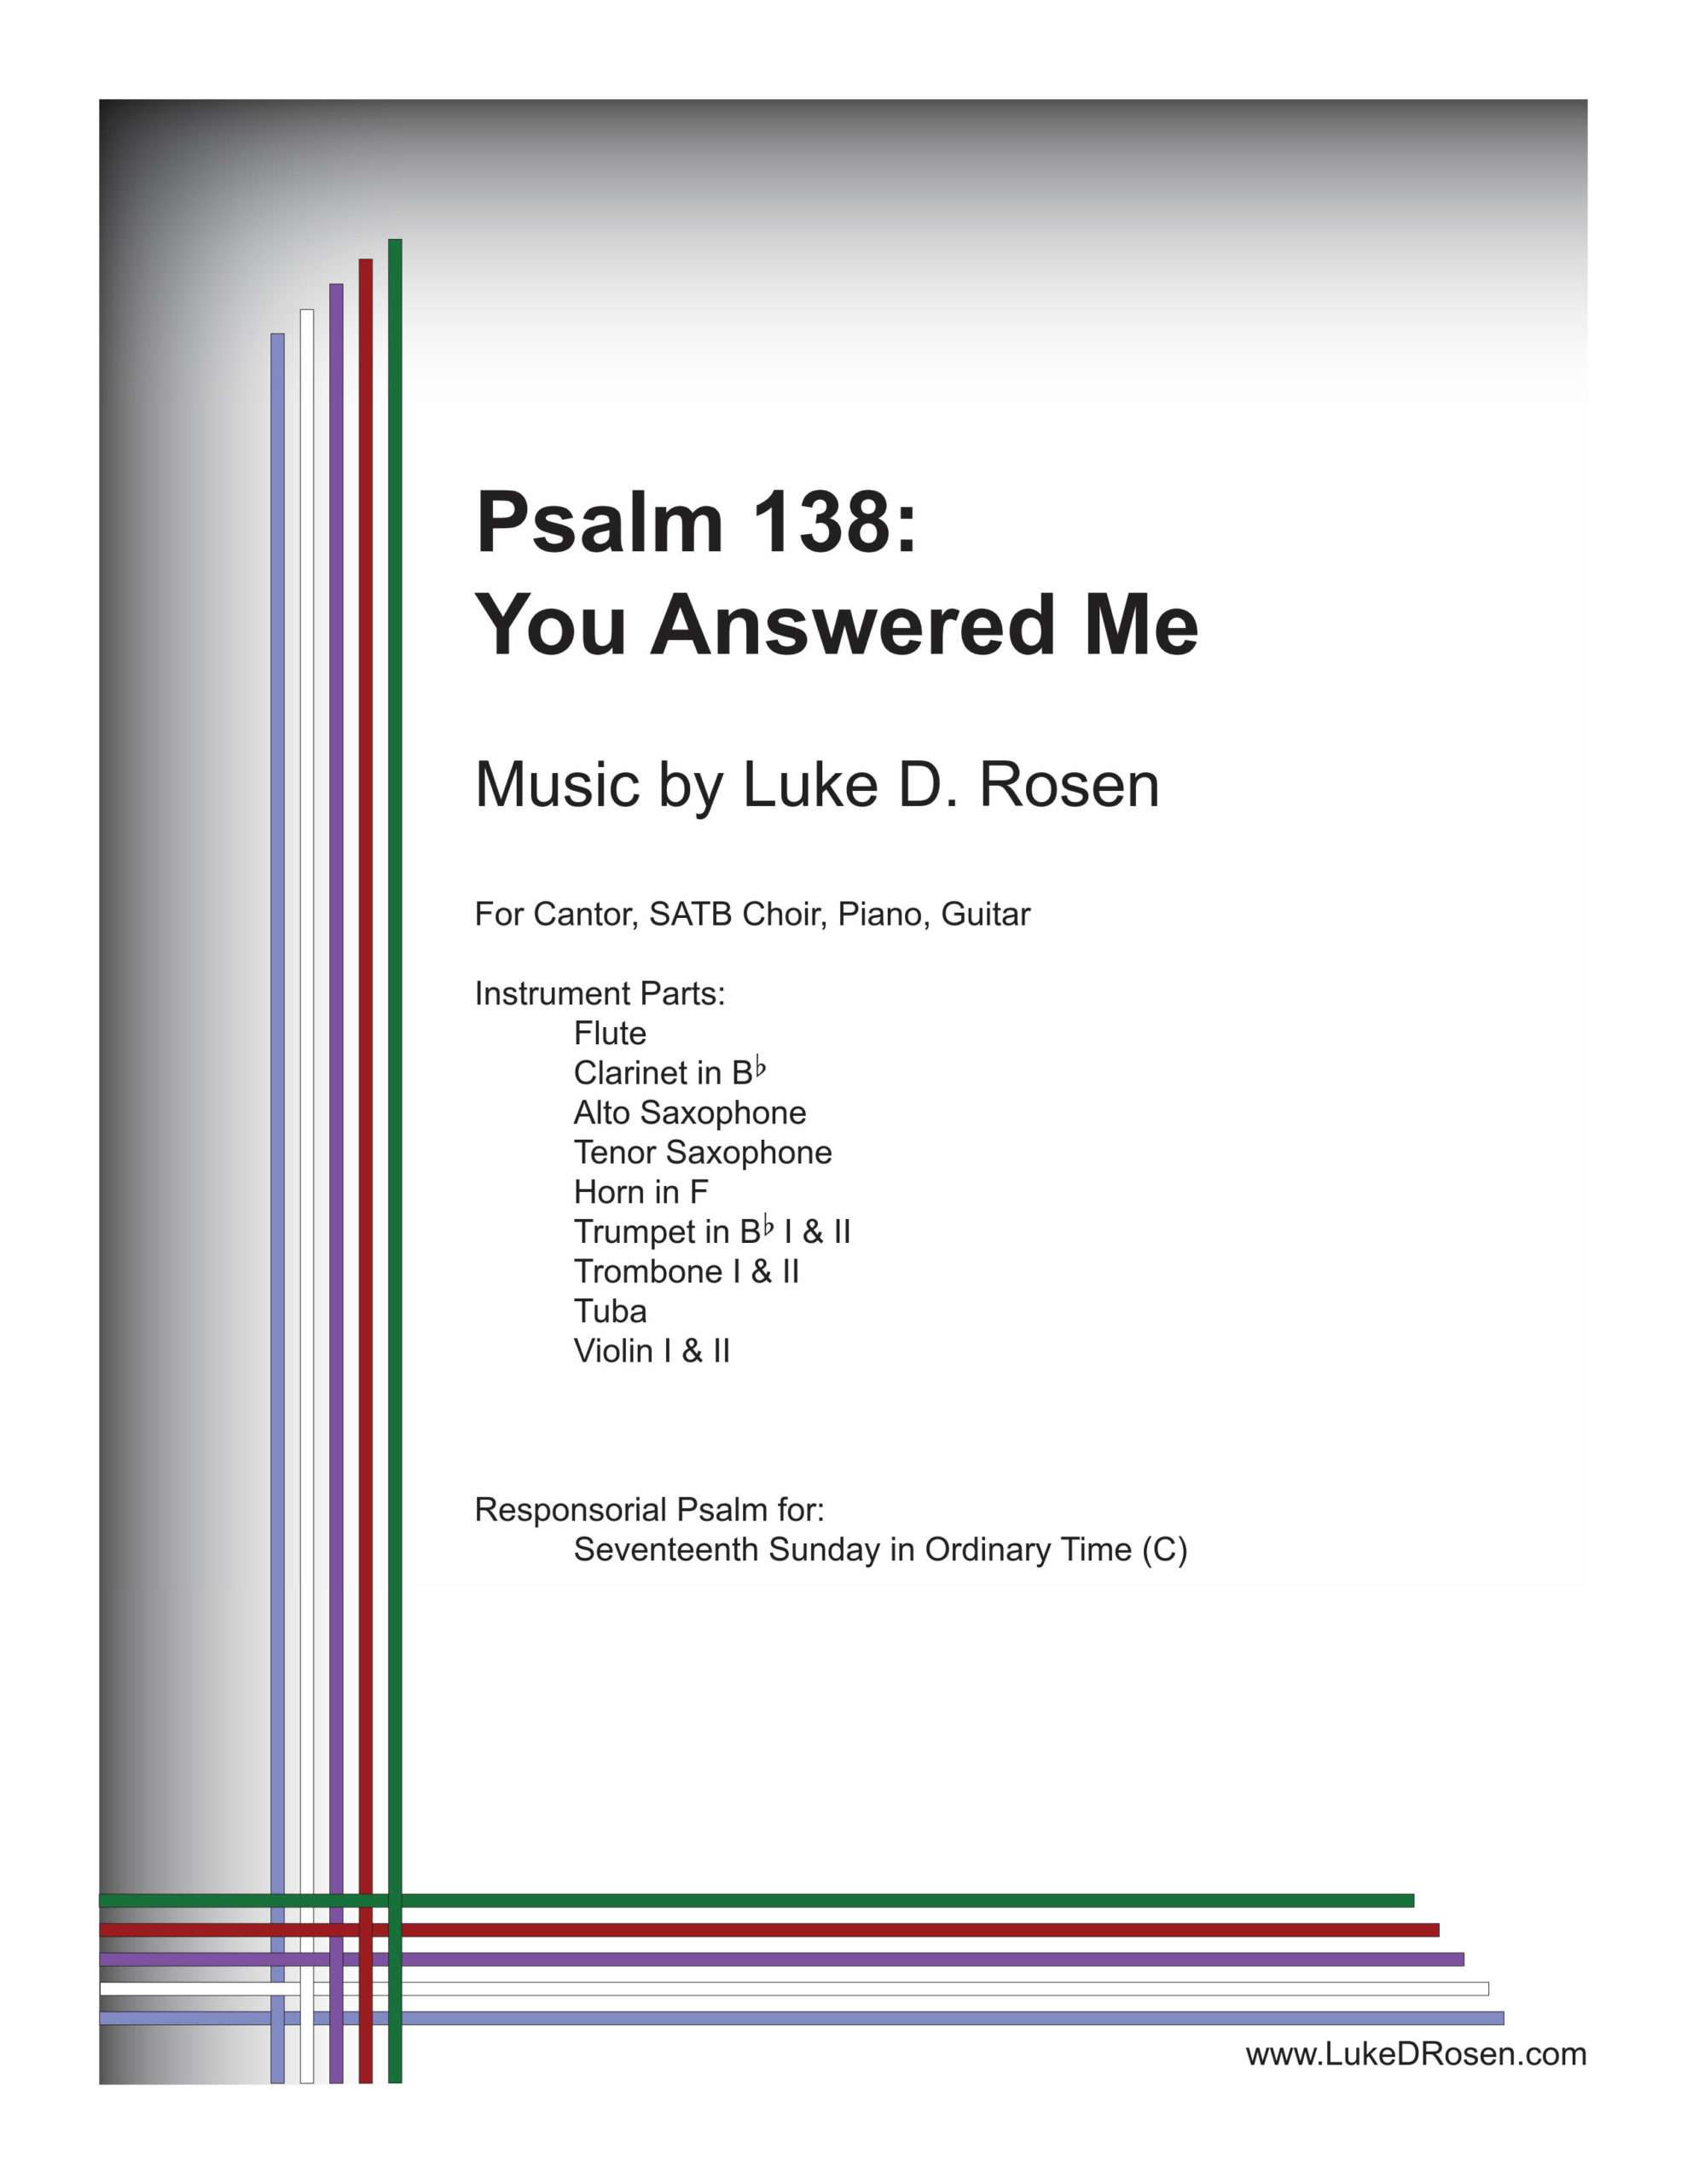 Psalm 138 – You Answered Me (Rosen)